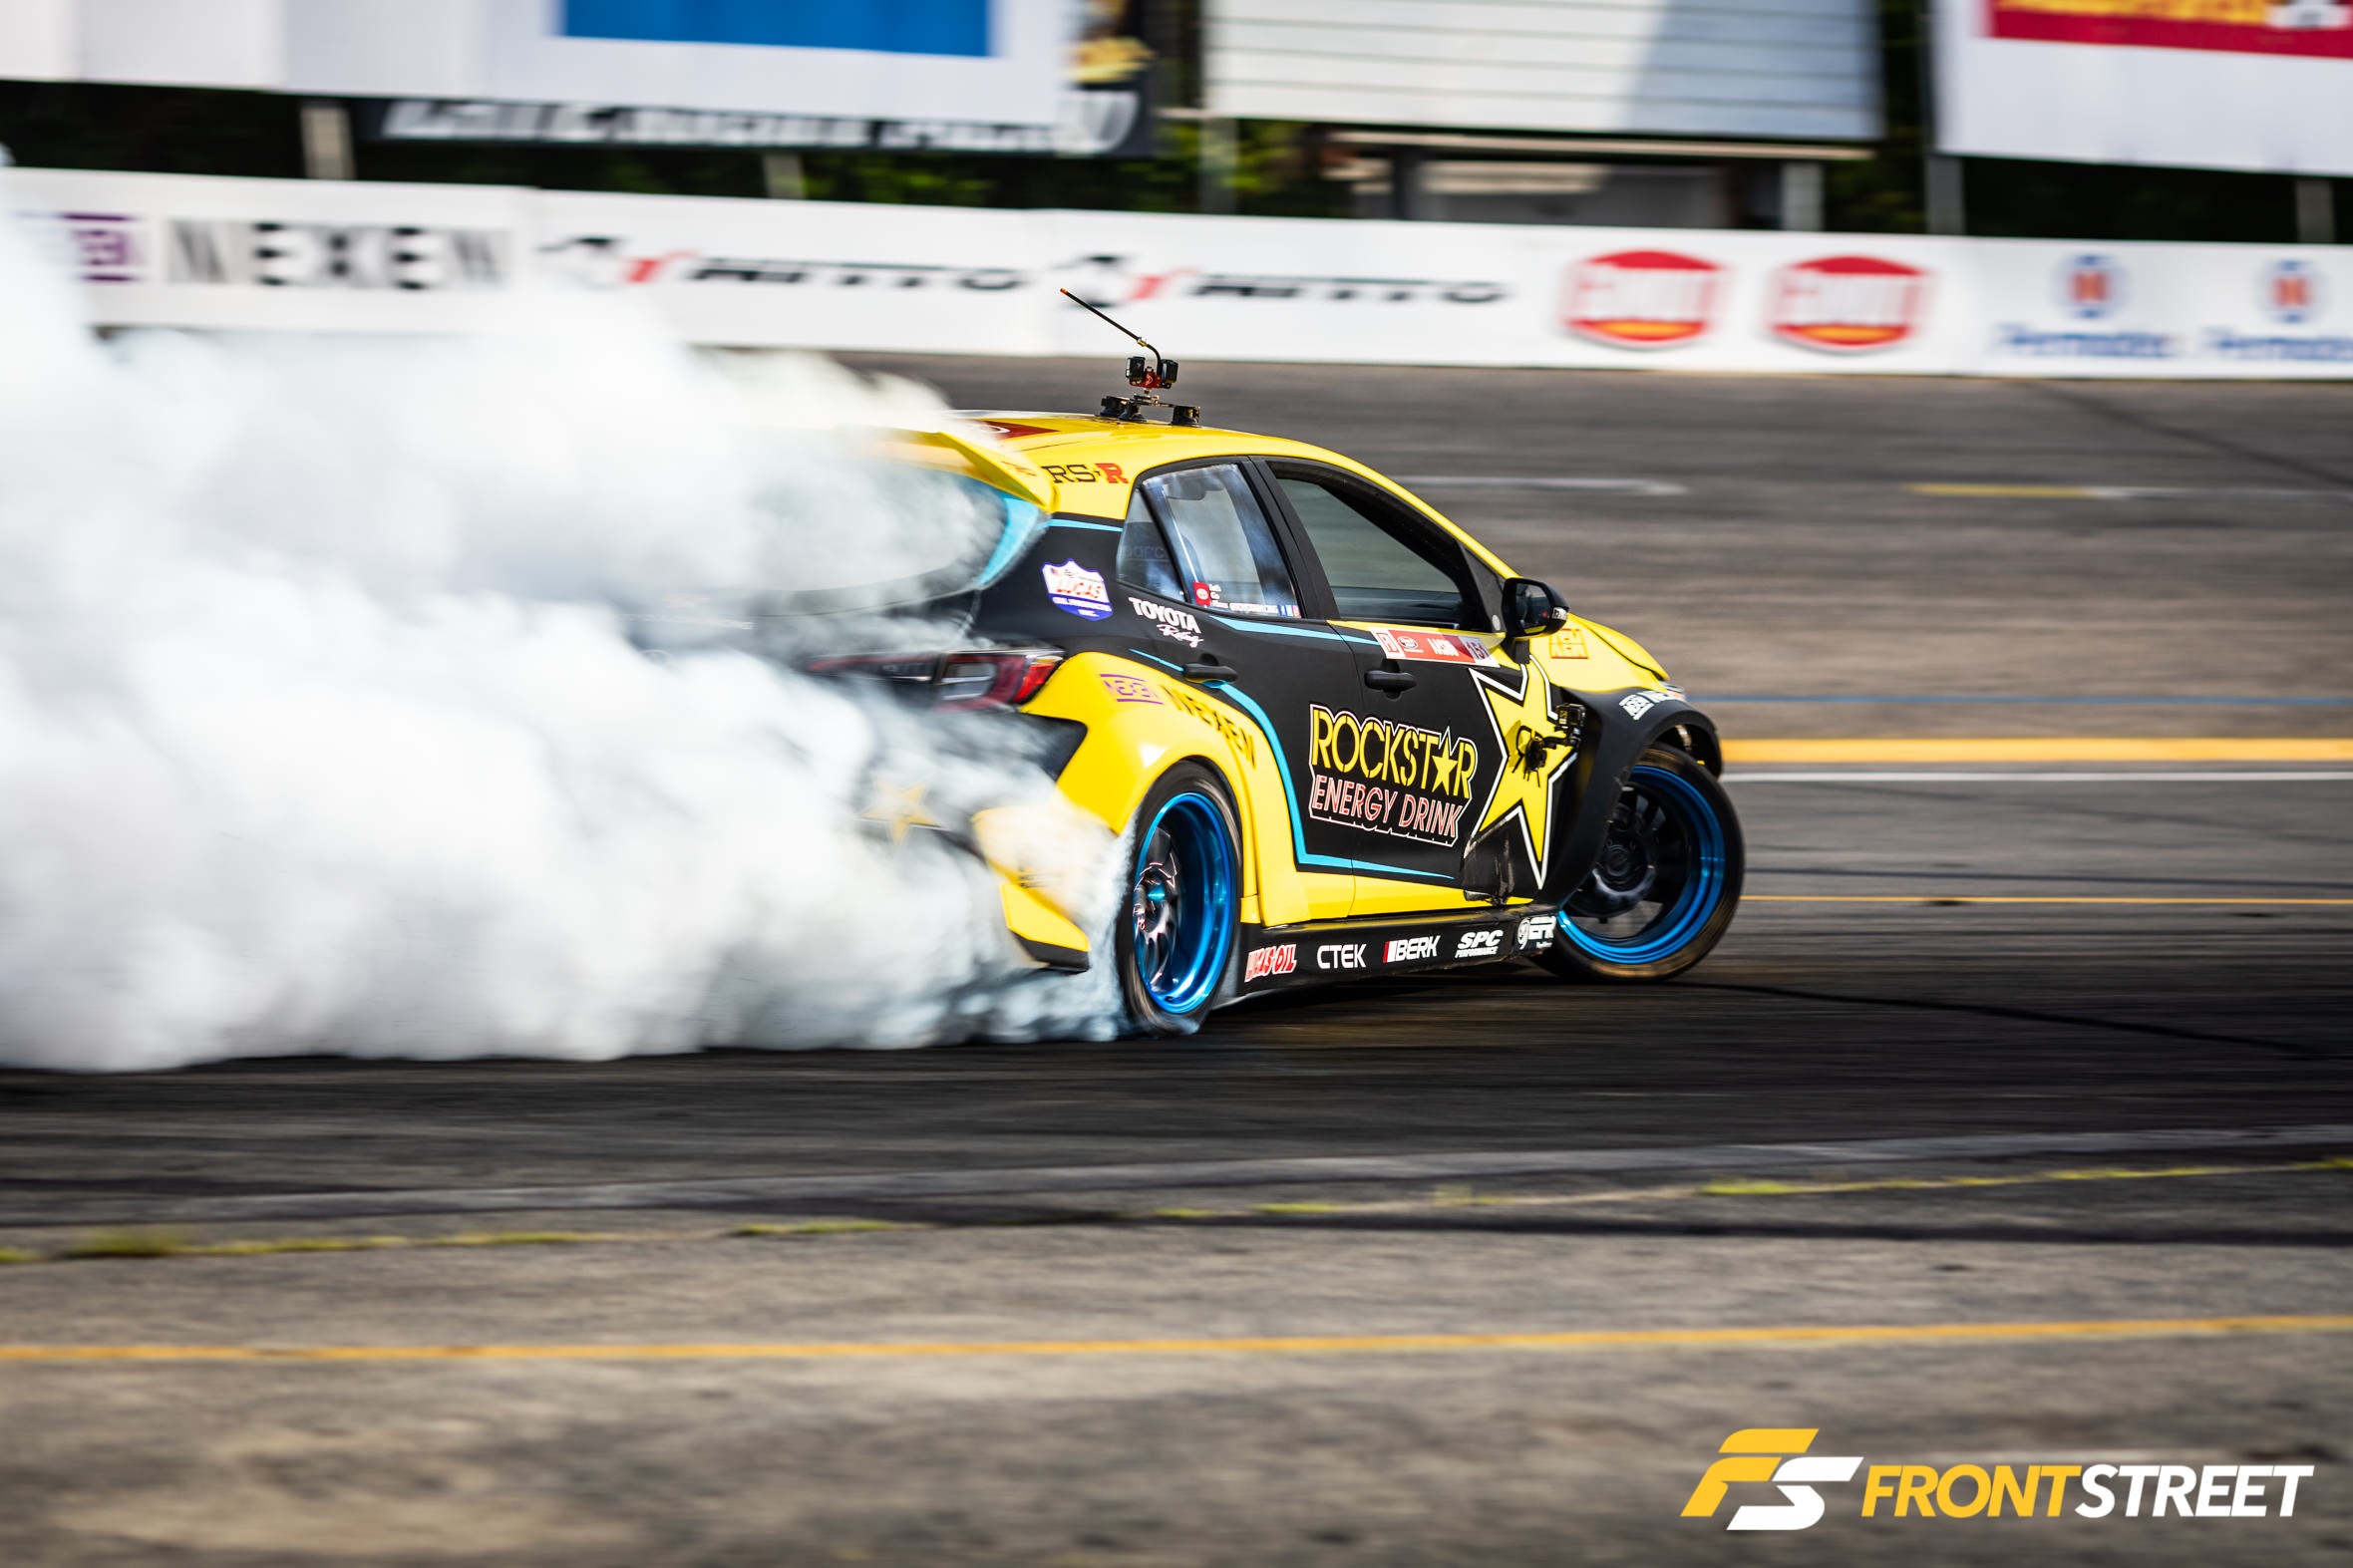 Formula Drift First-Timer: I Learned That Car Control Is Everything